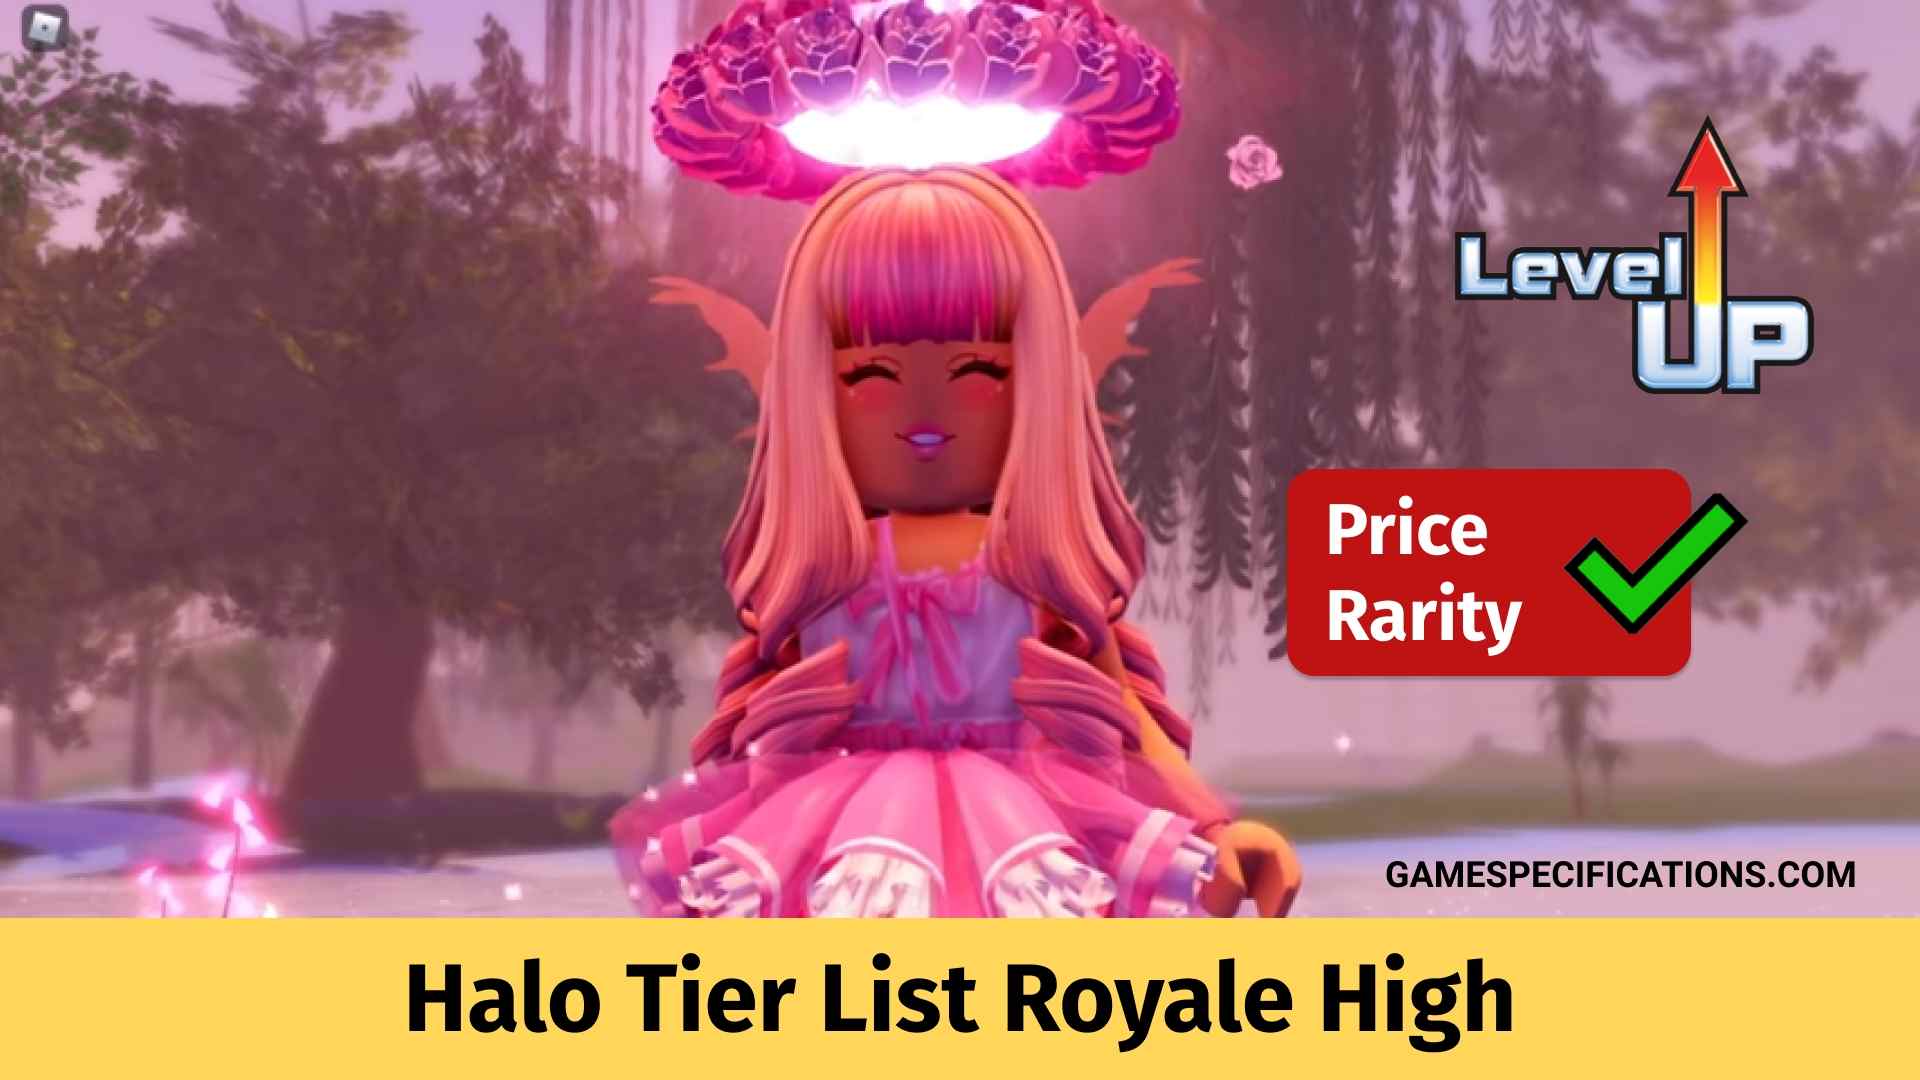 How much is the winter crystal halo 2018 worth in diamonds Info